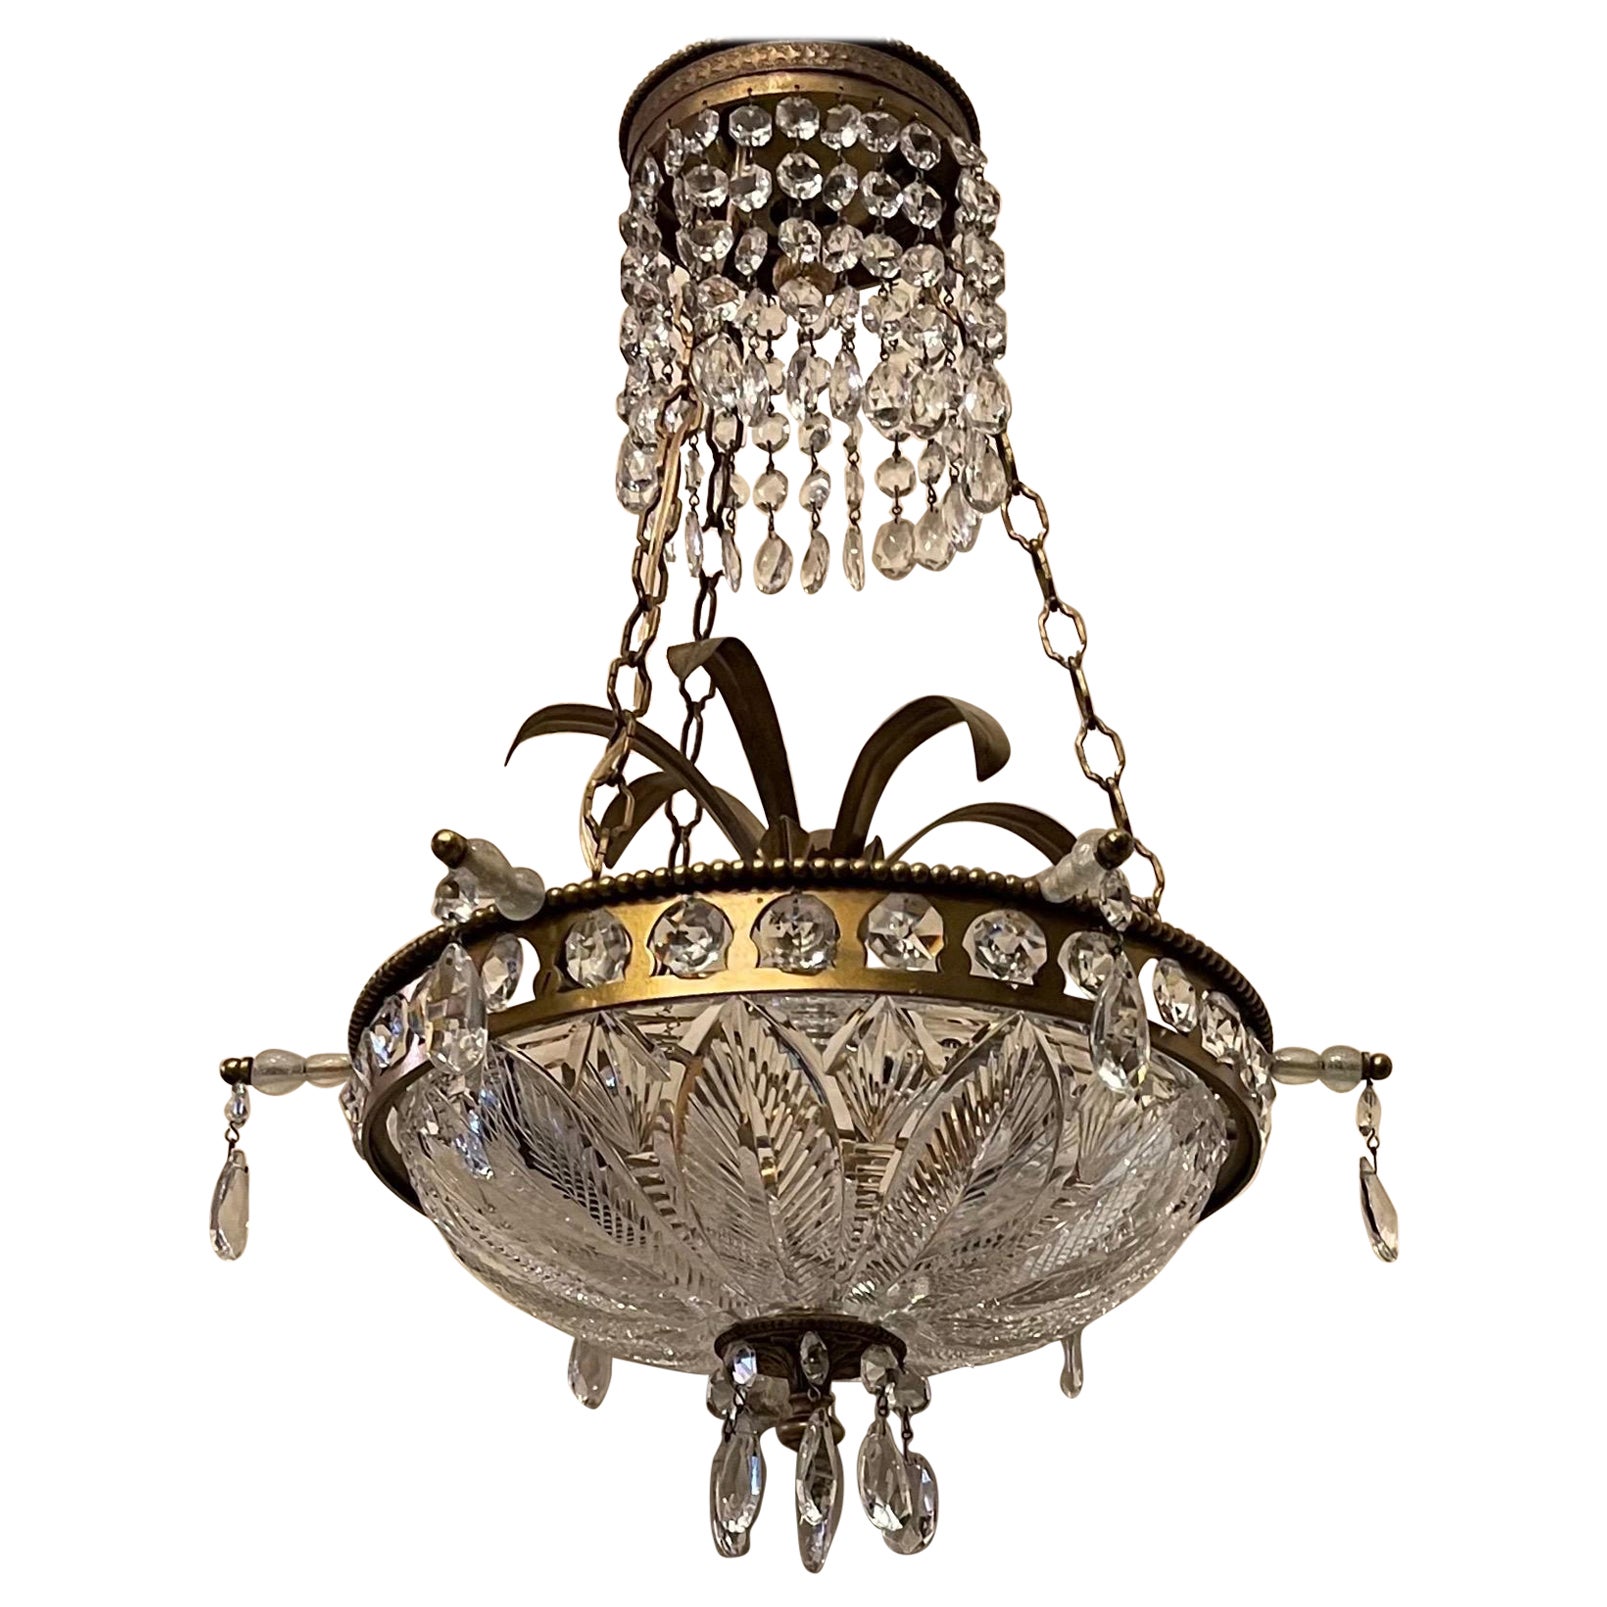 Wonderful Neoclassical Etched Cut-Crystal Bowl Bronze Chandelier Ormolu Fixture For Sale